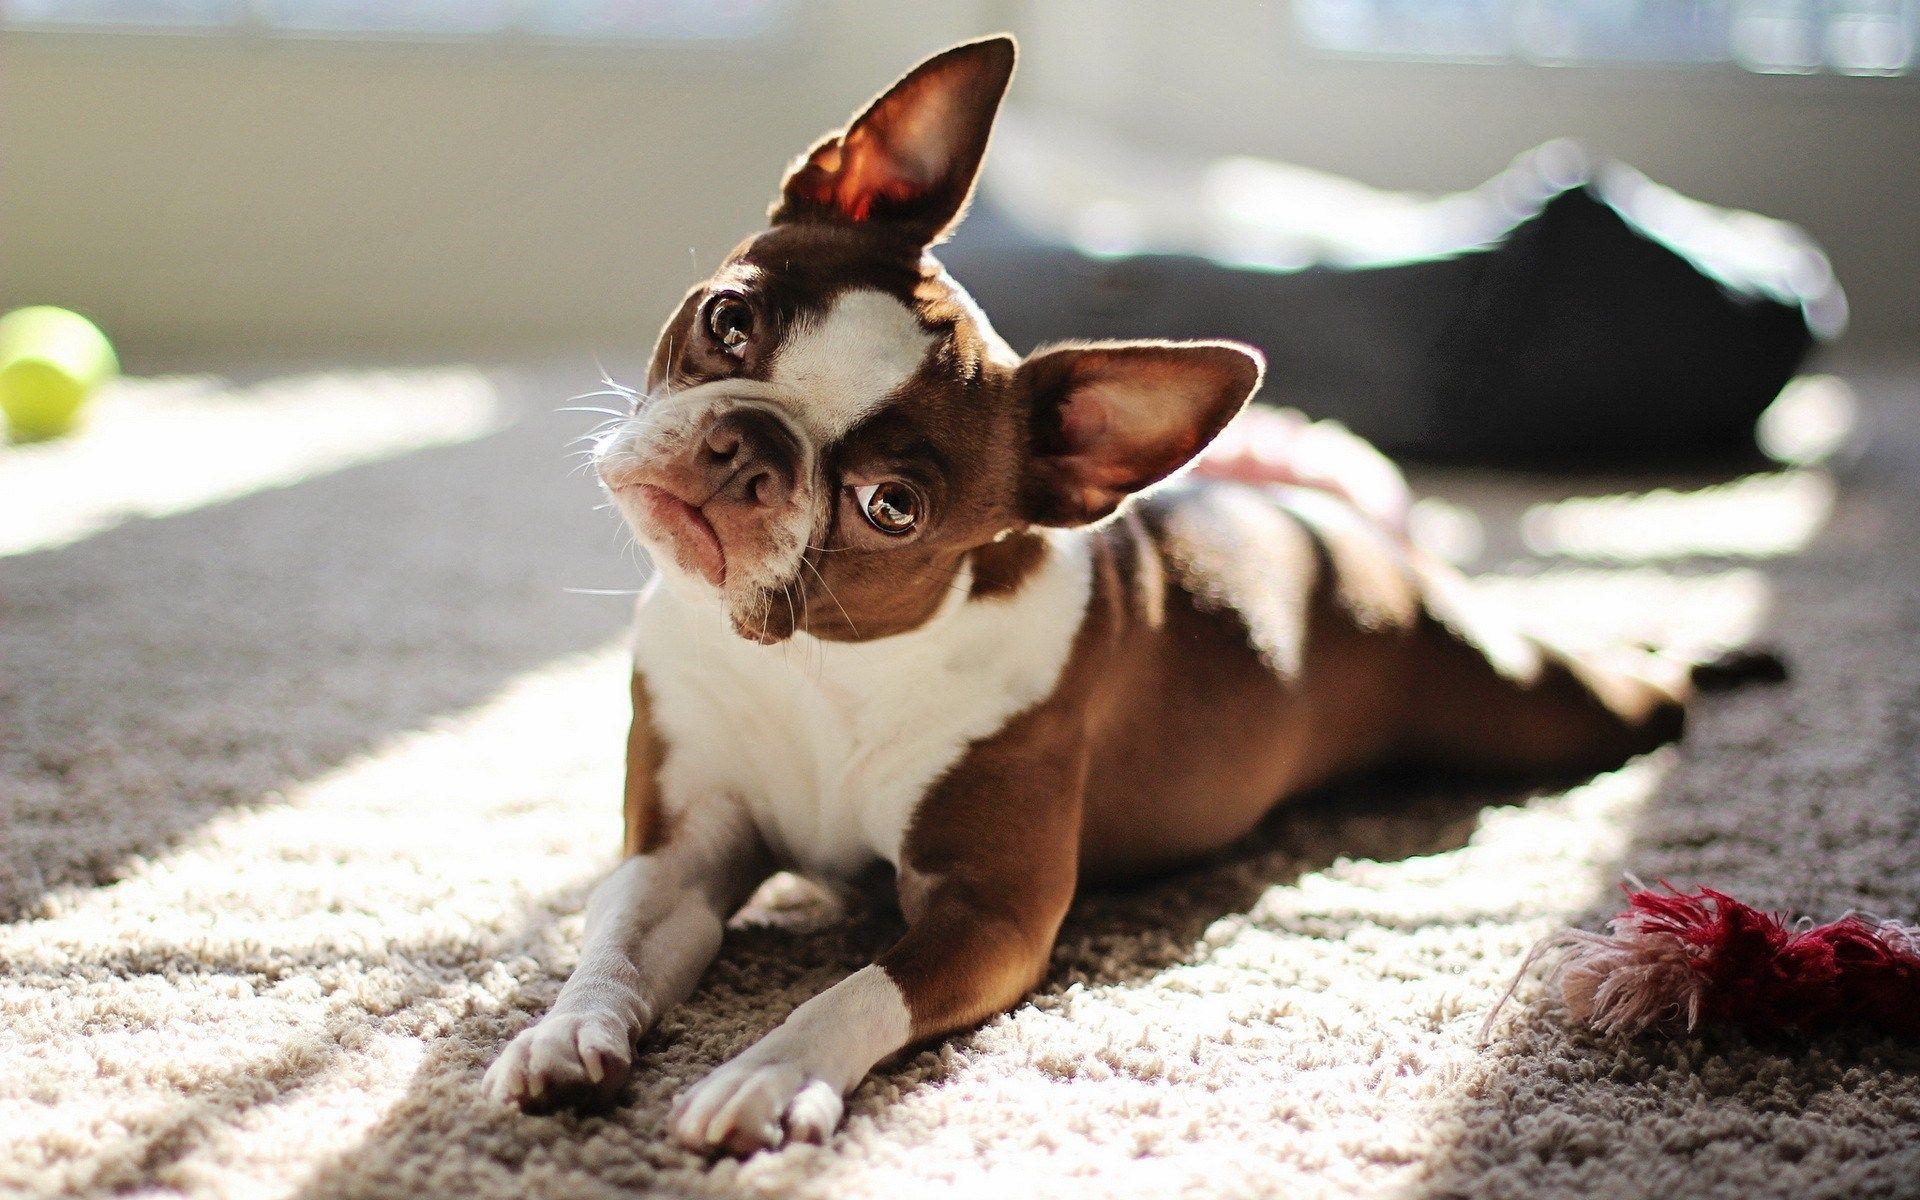 Boston Terrier Wallpaper Android Apps on Google Play. HD